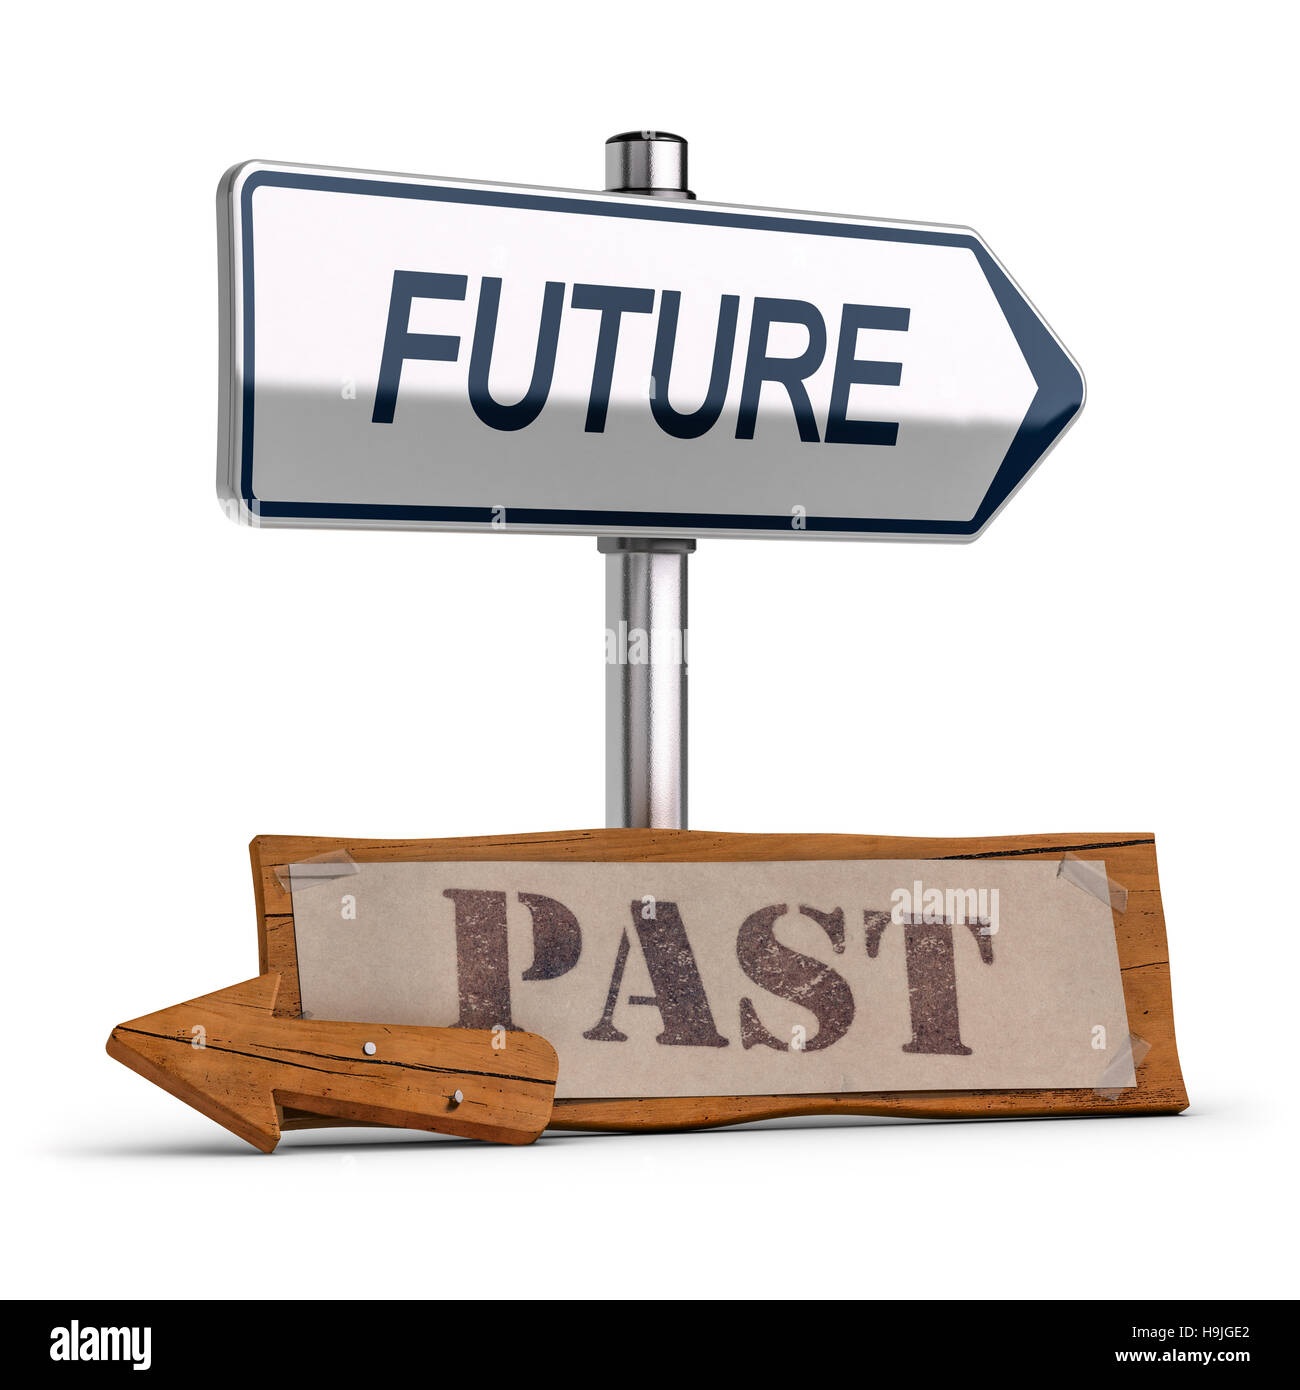 3D illustration of two road signs the first one is modern with the text future and the second one is an old wooden sign with the word past. Business c Stock Photo